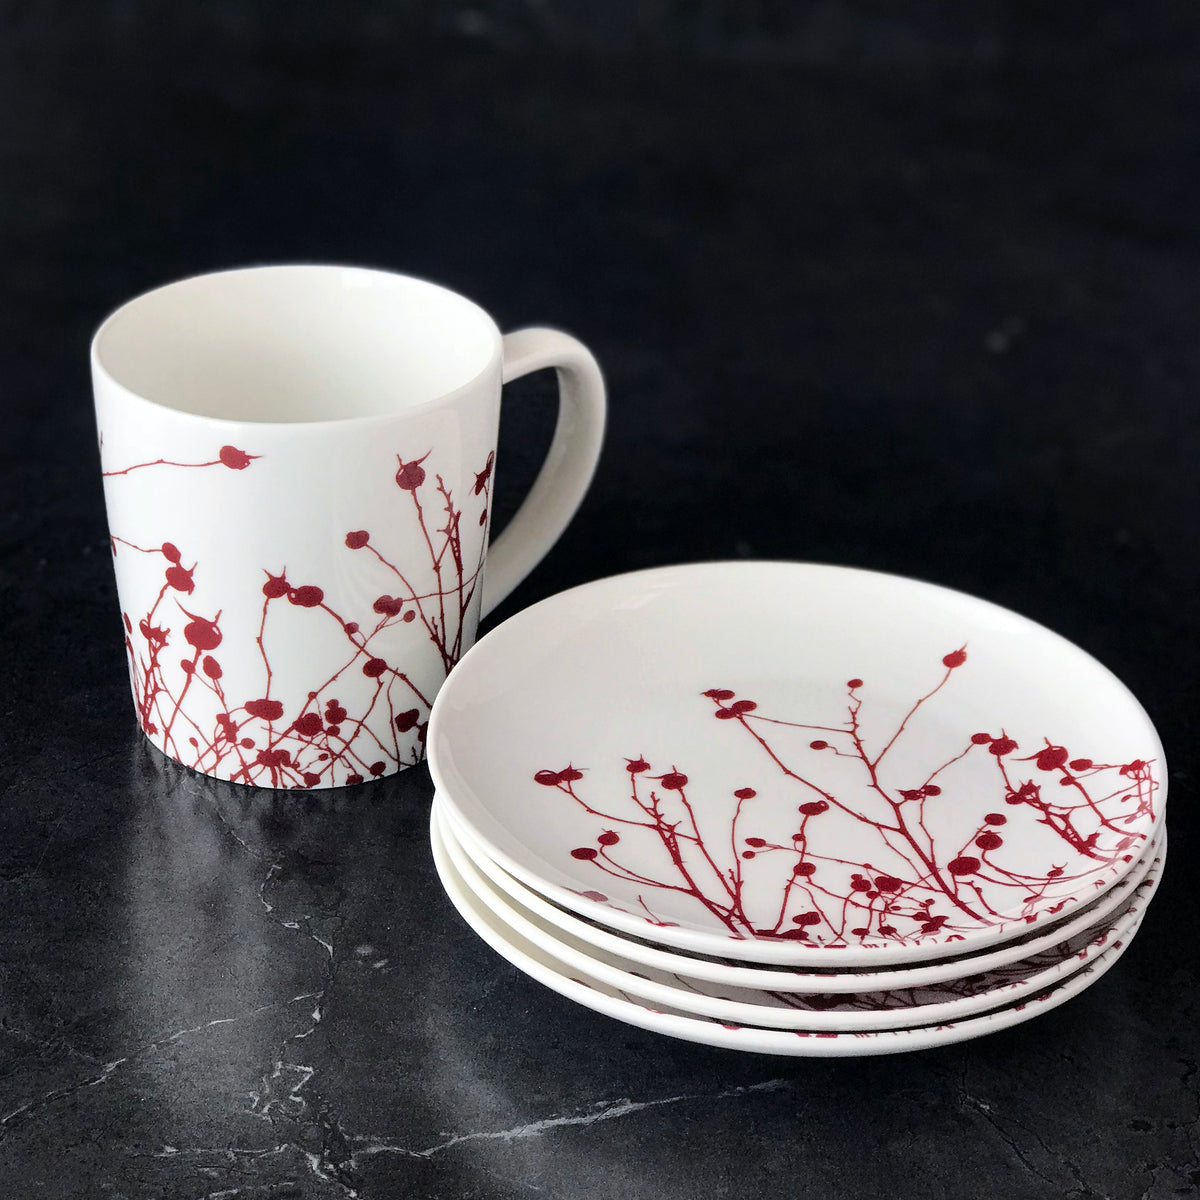 A set of Winterberries Canapé Plates and cups with red flowers on them from Caskata Artisanal Home.